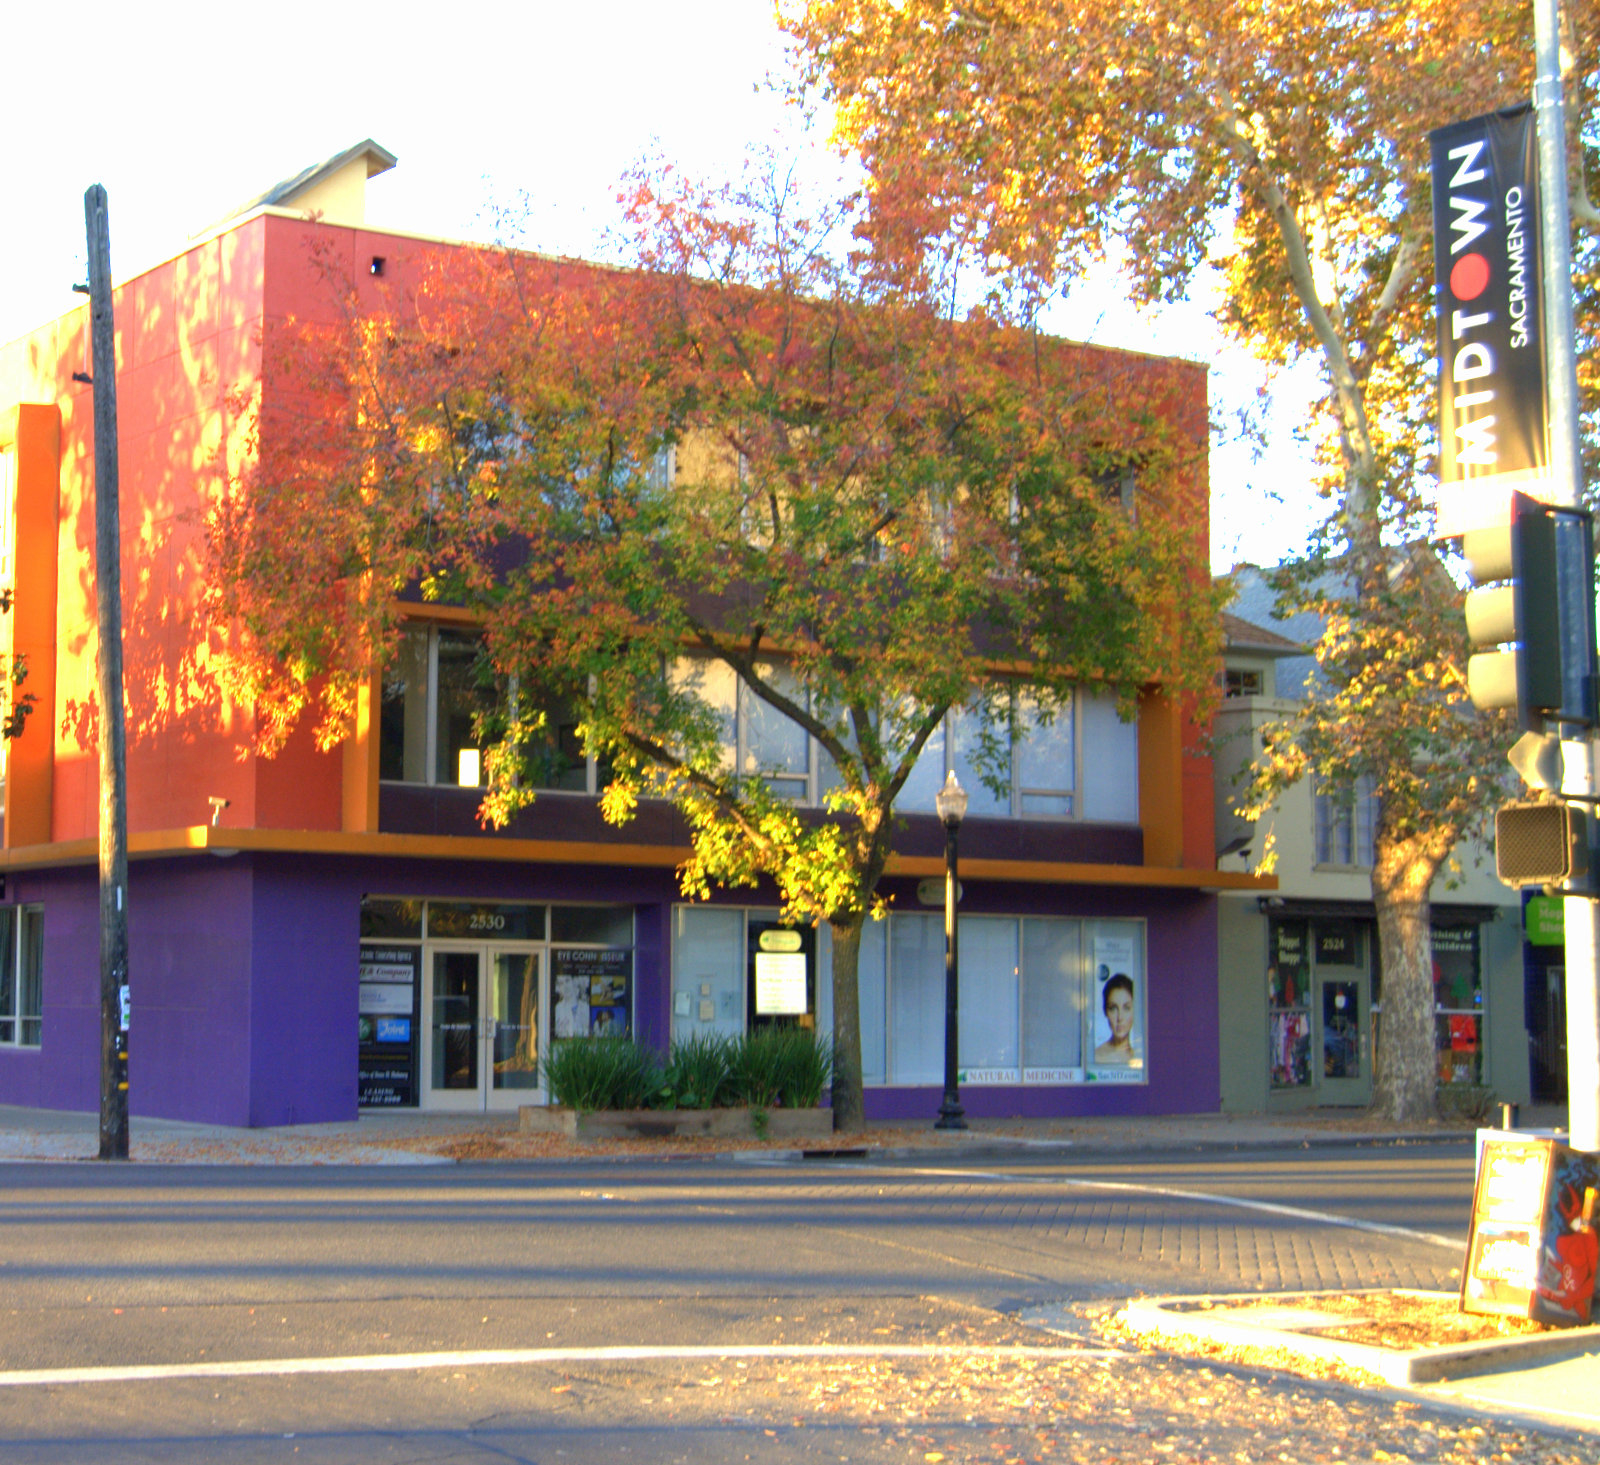 Office at the corner of 26th and J Street